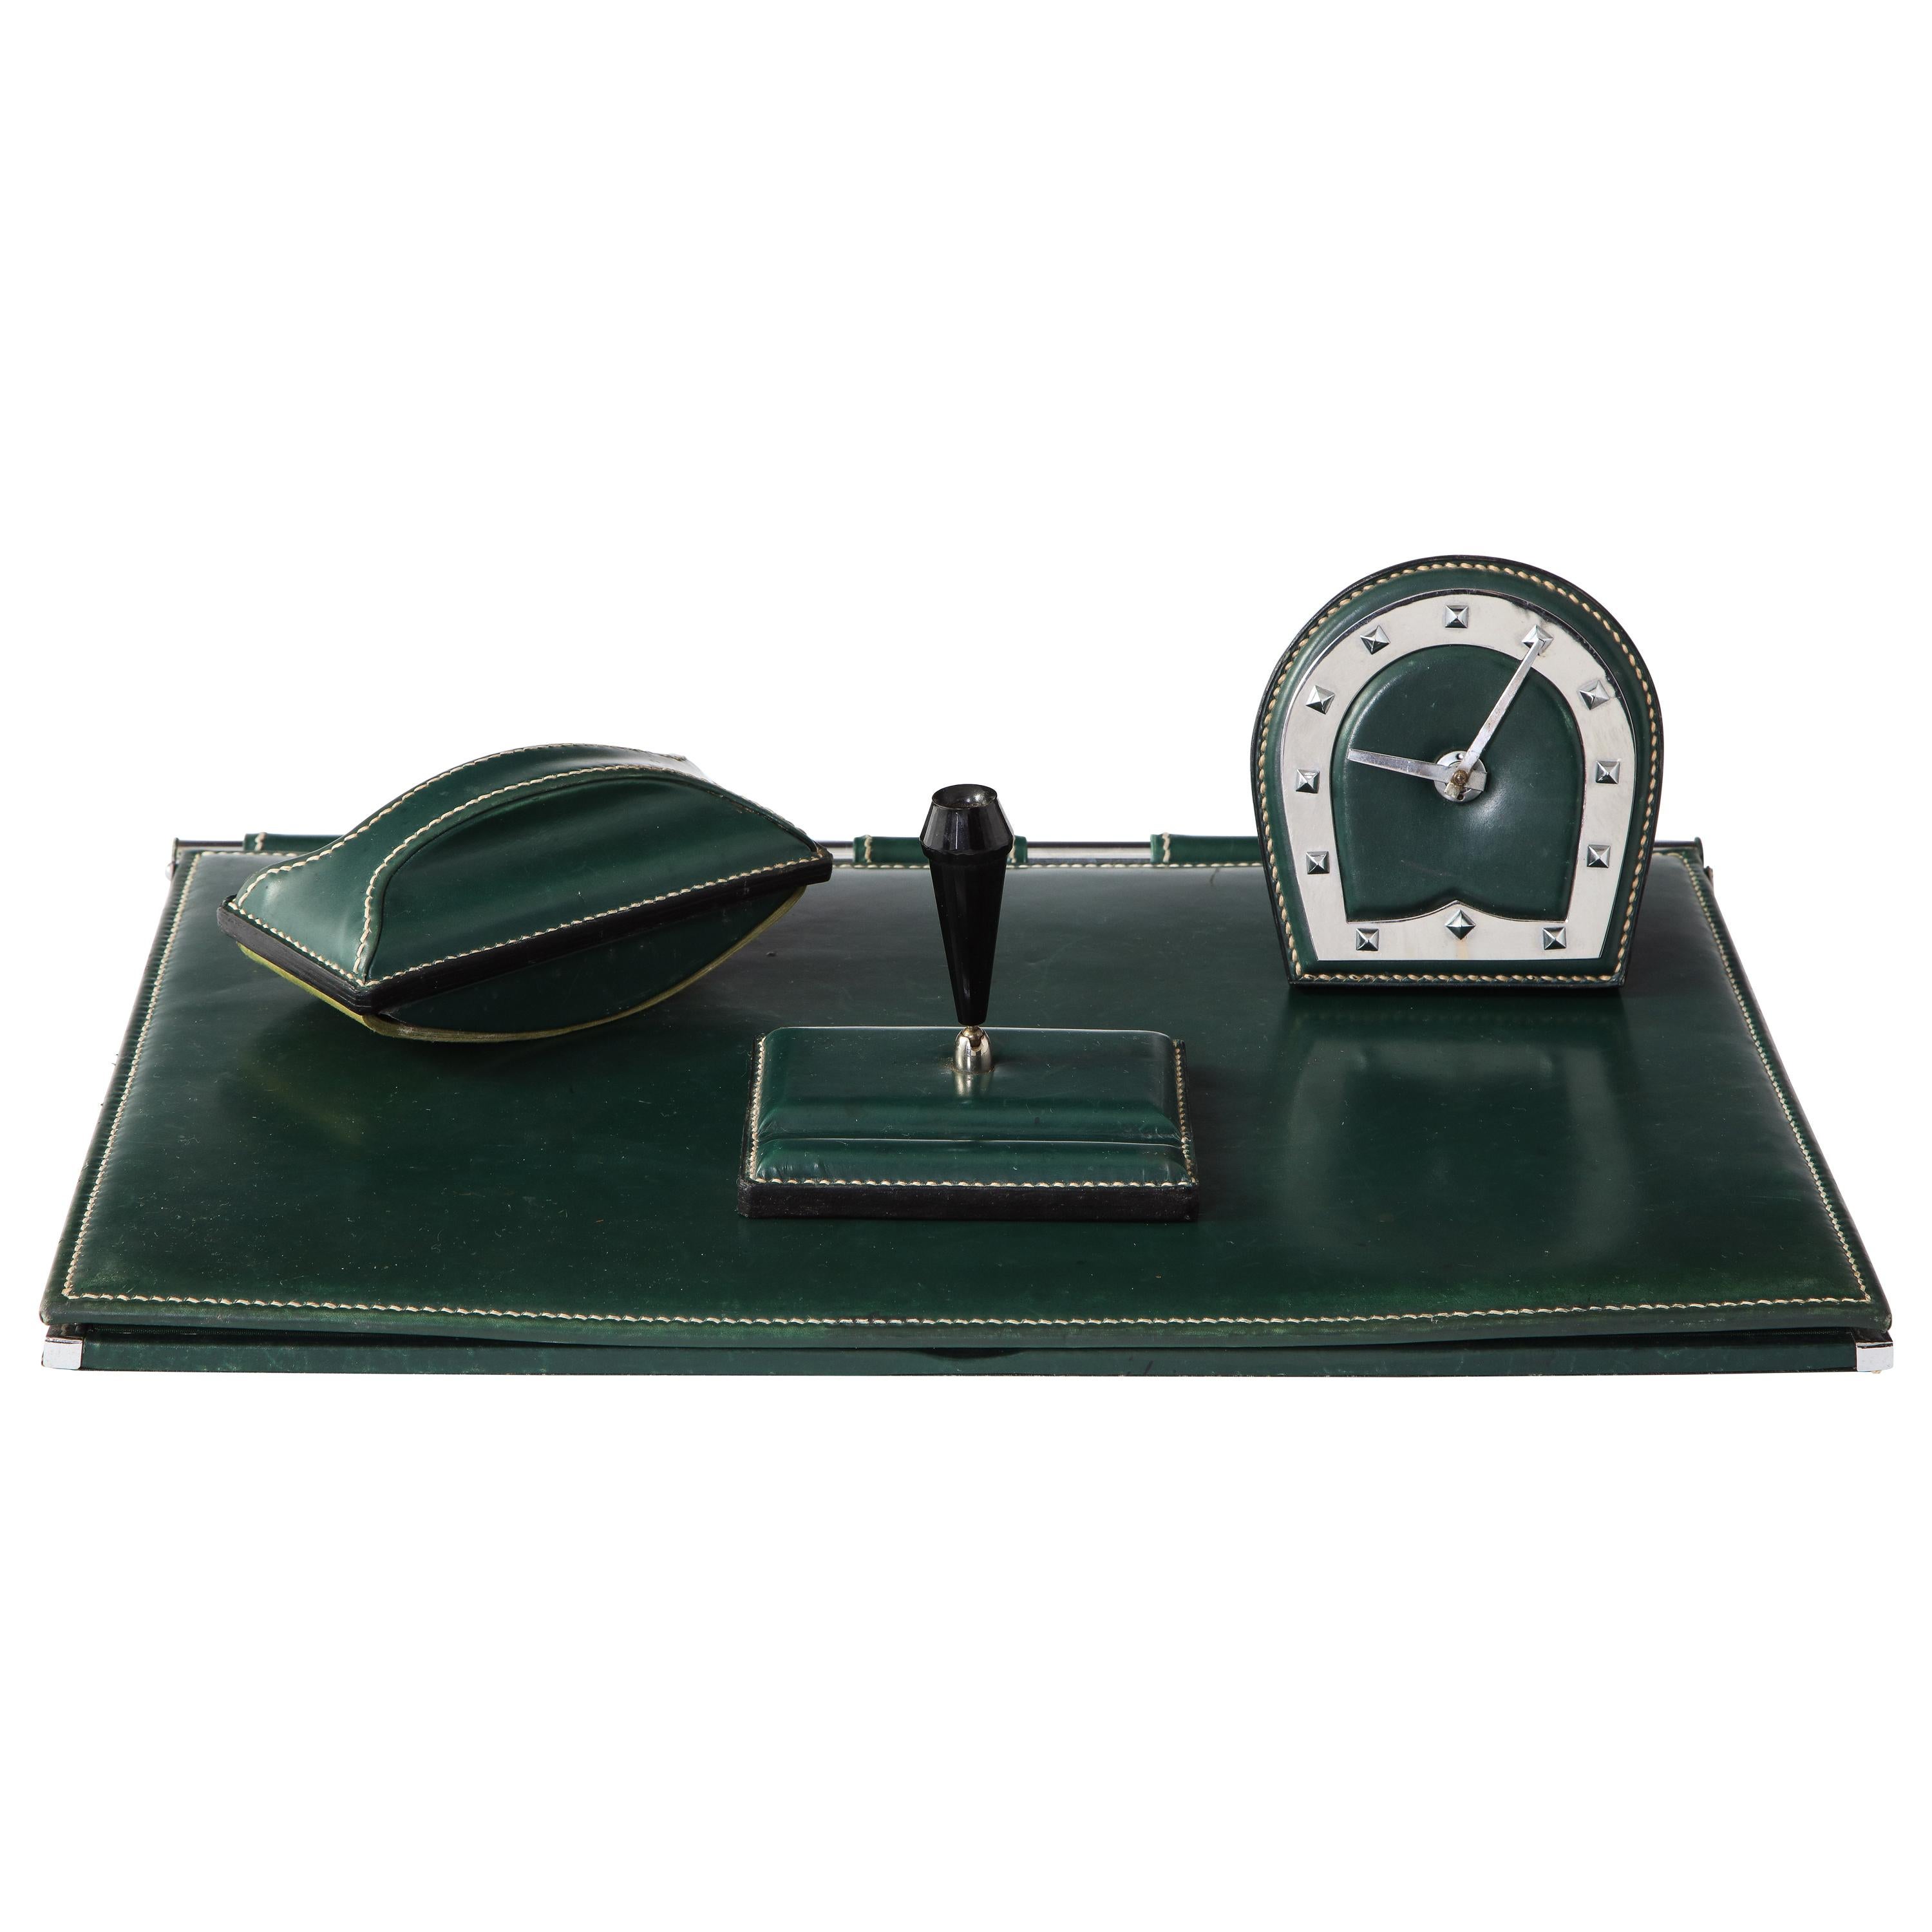 Emerald Green Leather Desk Set by Jacques Adnet, France, 1950s